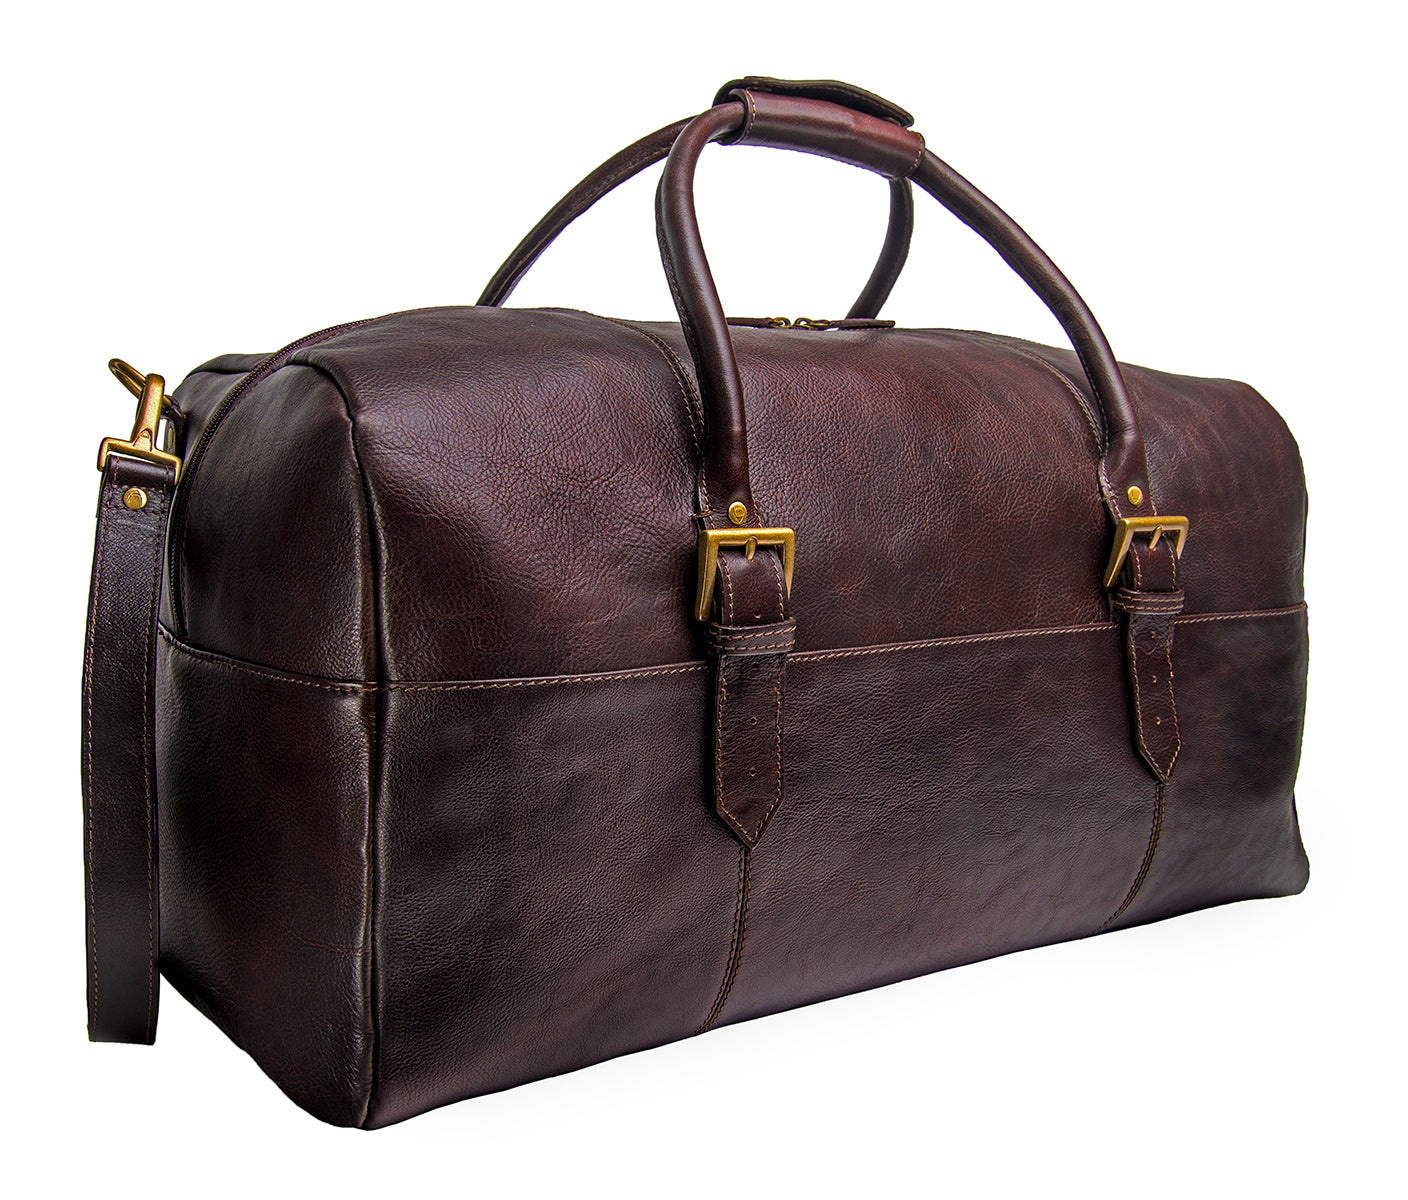 Hidesign Charles Leather Cabin Travel Duffle Weekend Bag for Men ...